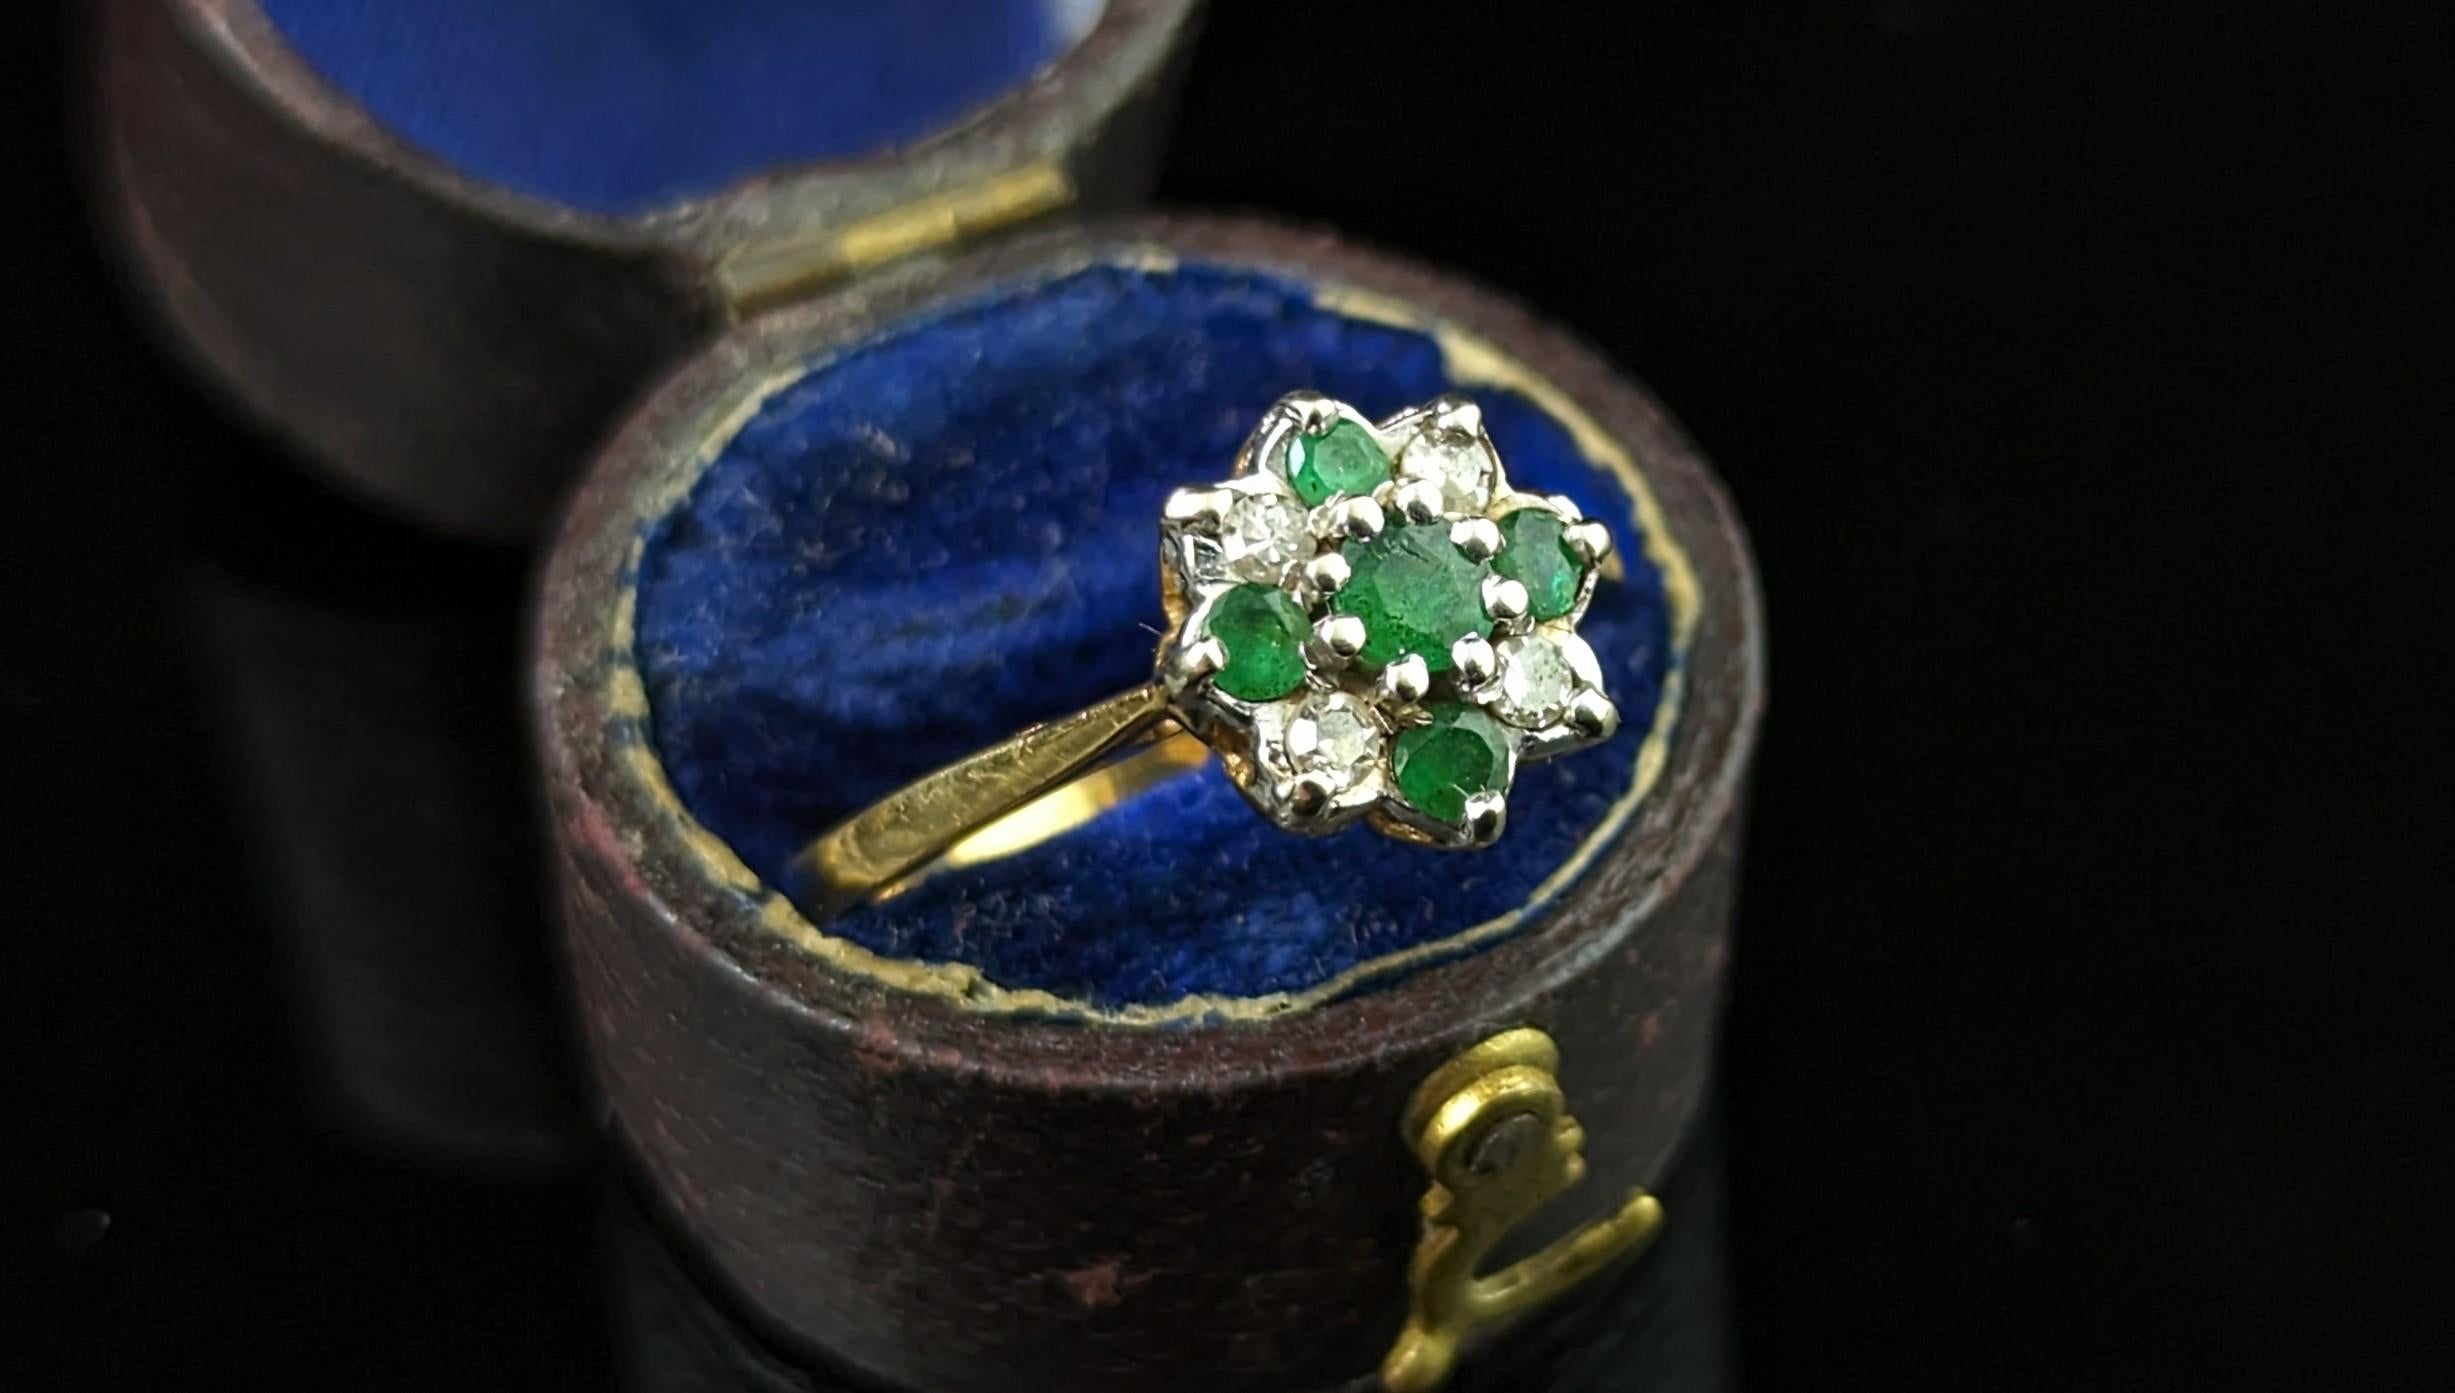 The sweetest vintage Art Deco era Emerald and Diamond cluster ring.

This pretty ring is such a joyful piece of jewellery, crafted in rich buttery 18ct yellow gold the face is set with five round cut emeralds intercepted by four white diamonds and